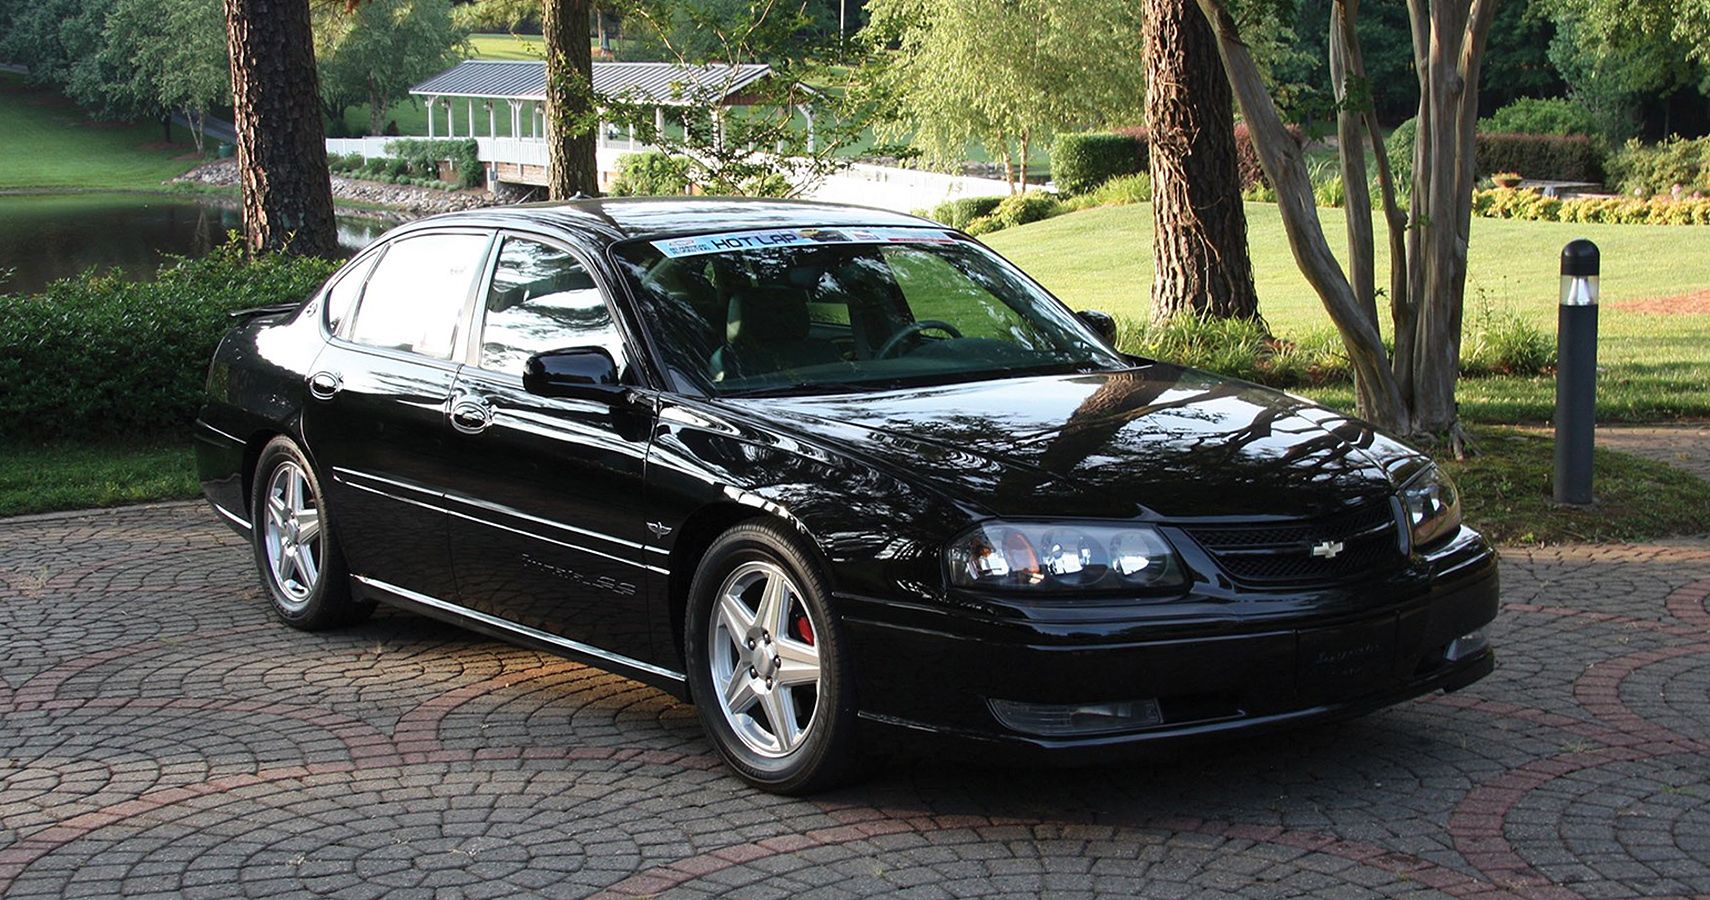 2004 Chevrolet Impala SS: Not Up To The Name